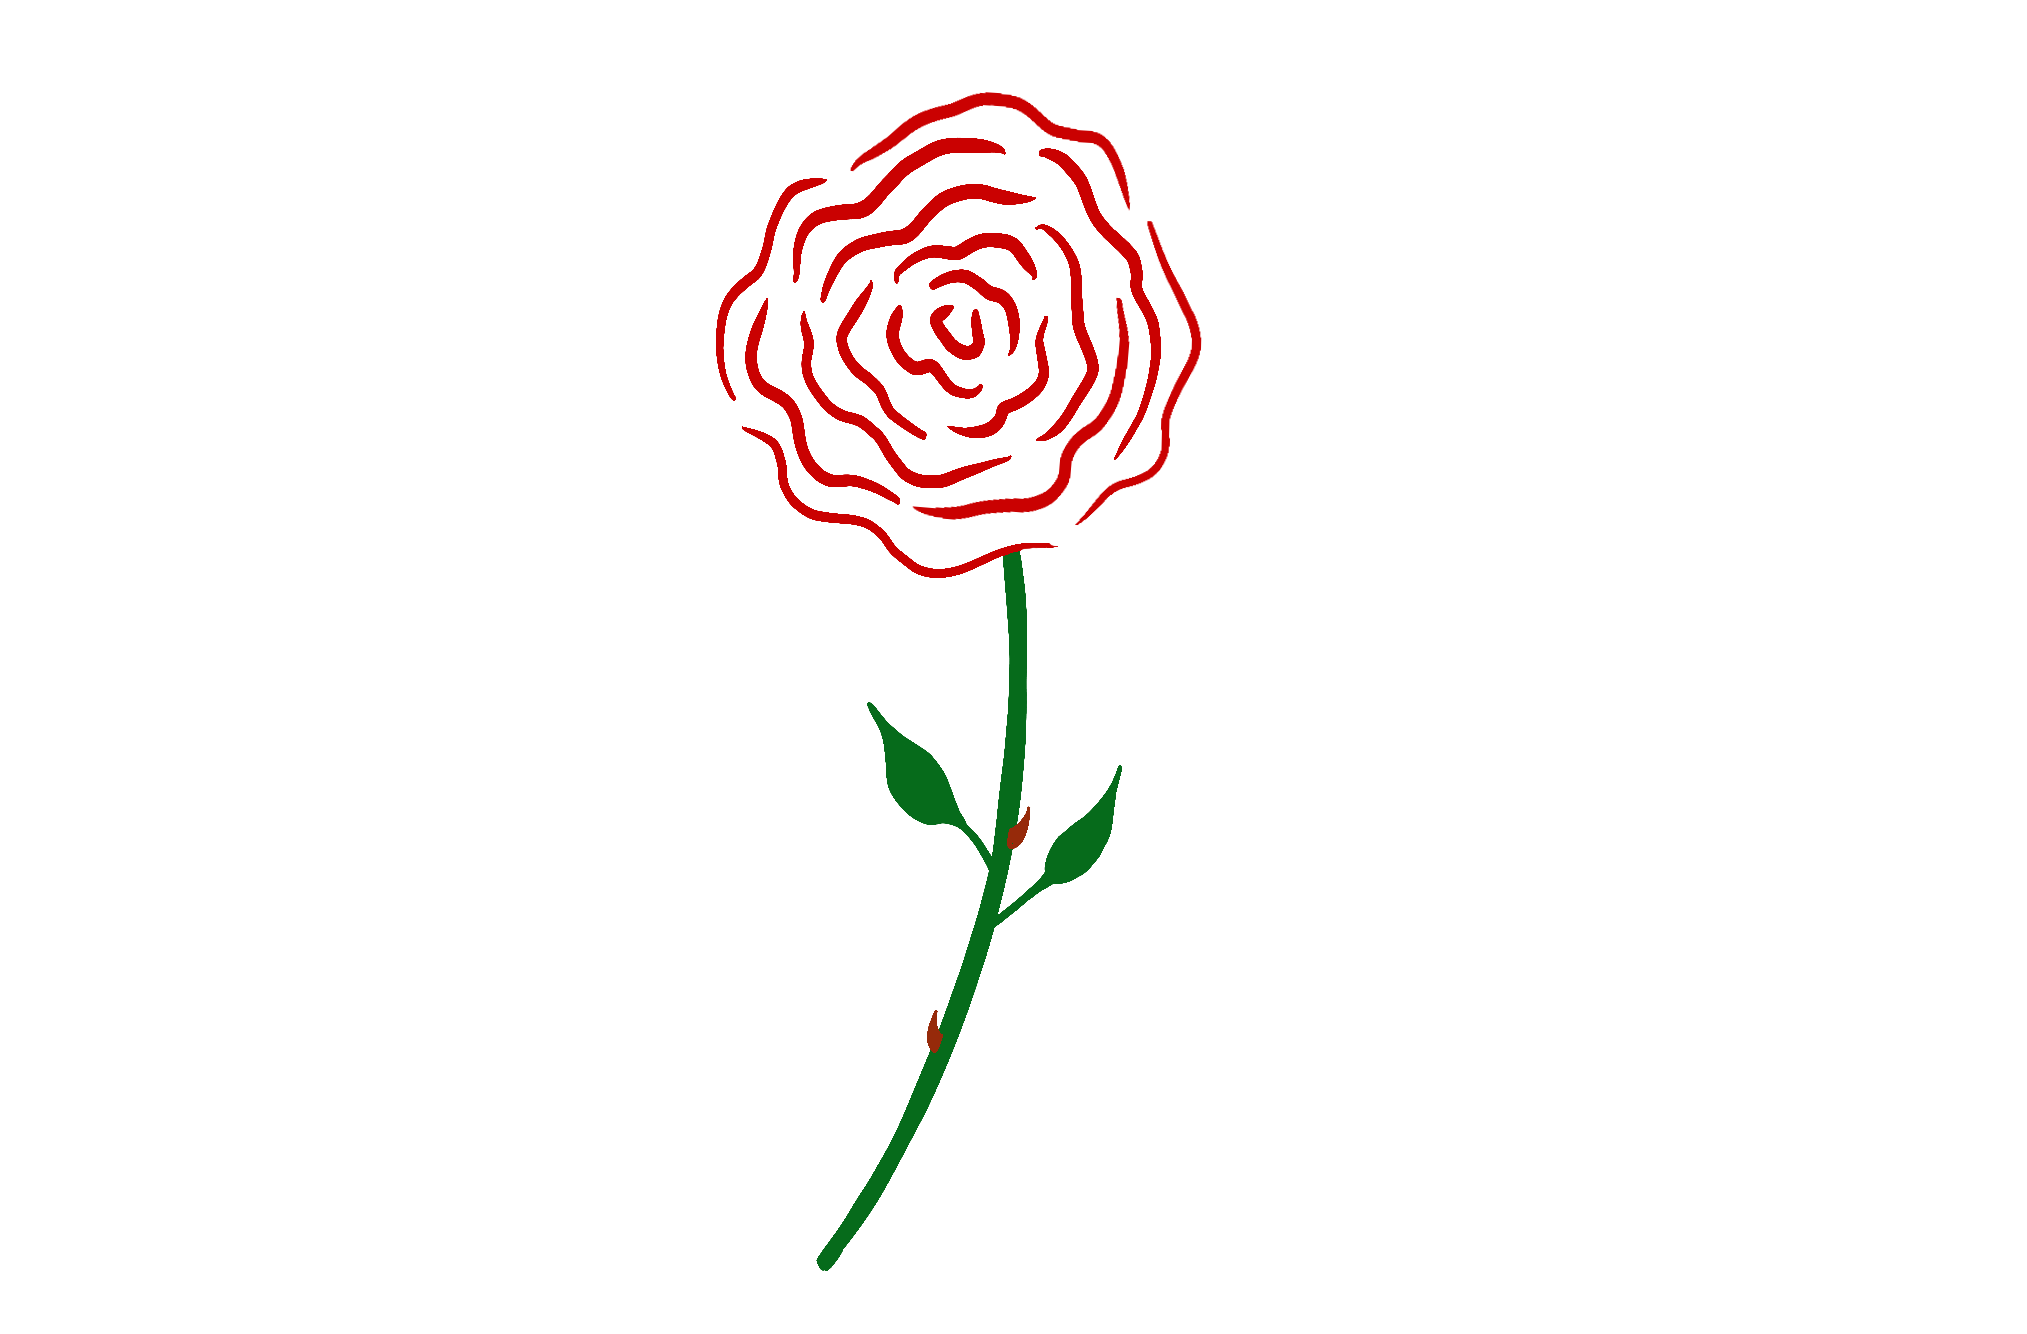 How To Draw a Rose For Kids - Easy Step-By-Step Tutorial